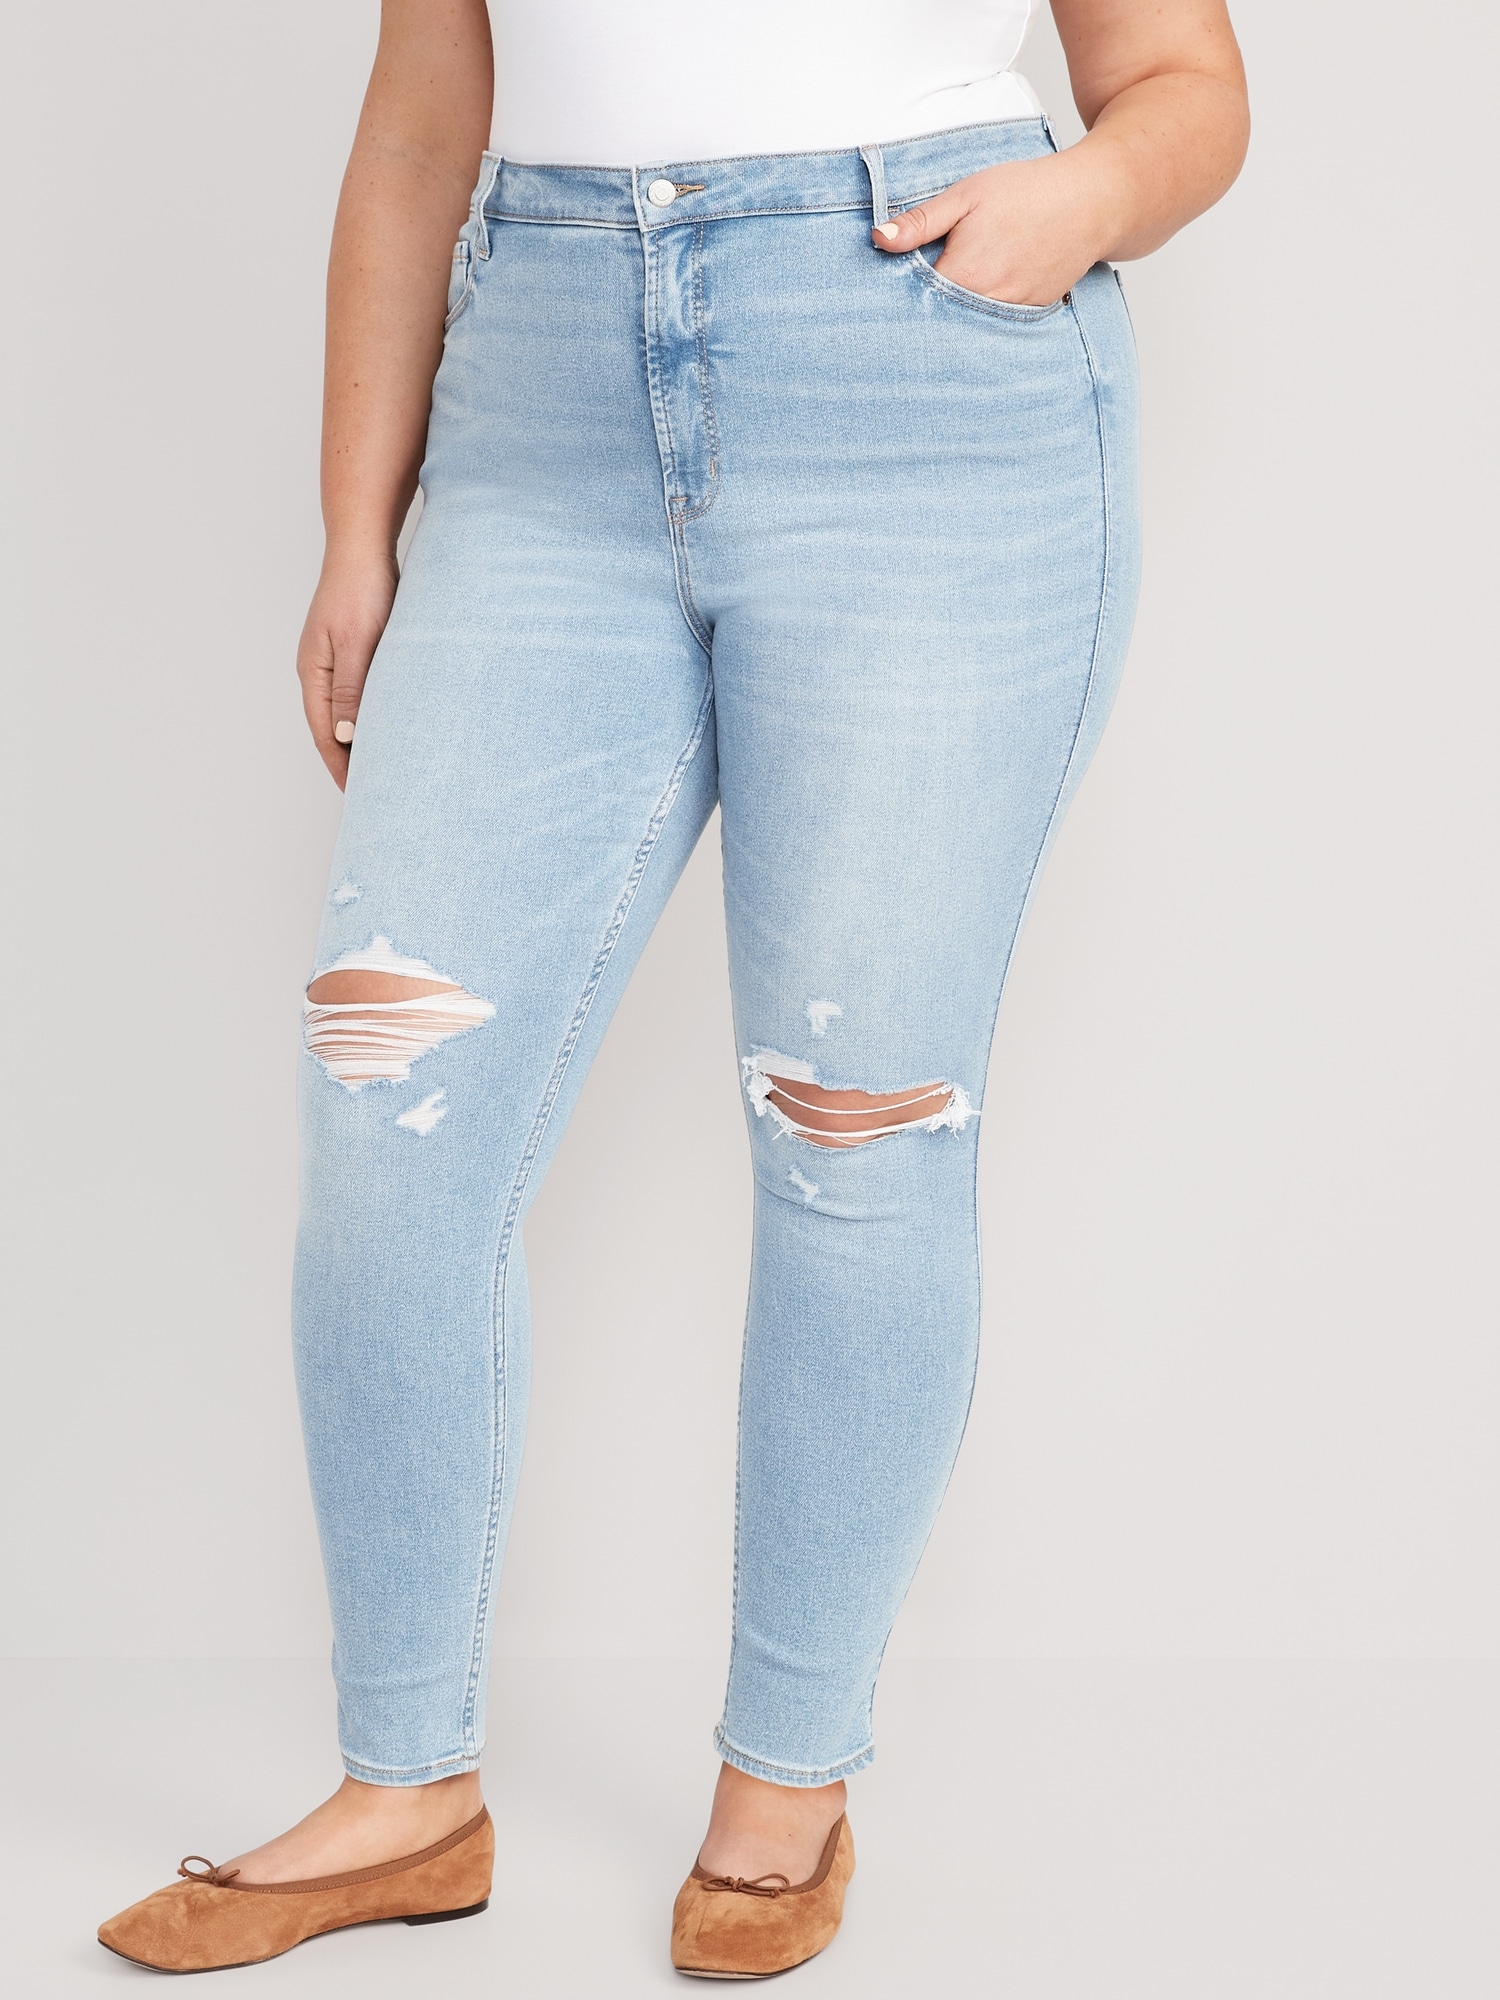 Extra High-Waisted Rockstar Jeans Stretch for 360° Super-Skinny Navy | Old Women